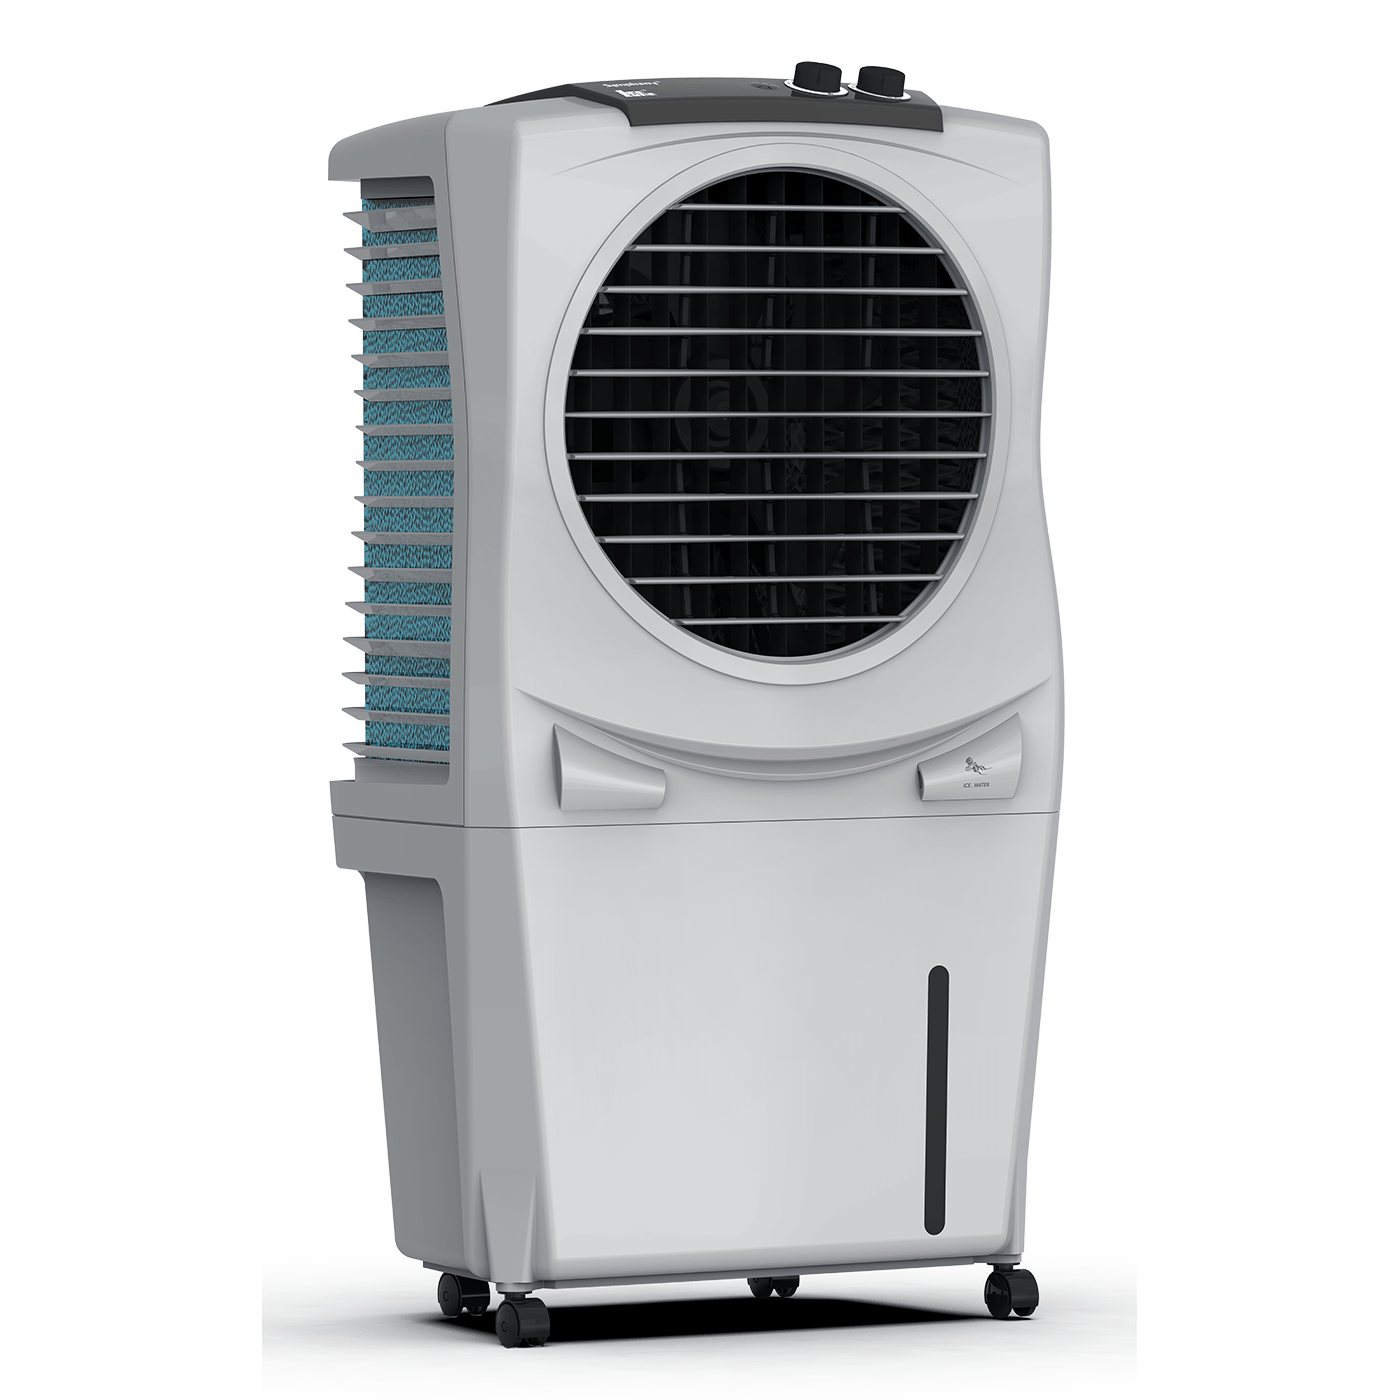 Ice Cube 27 Cooler, Room Air Cooler with Powerful Fan